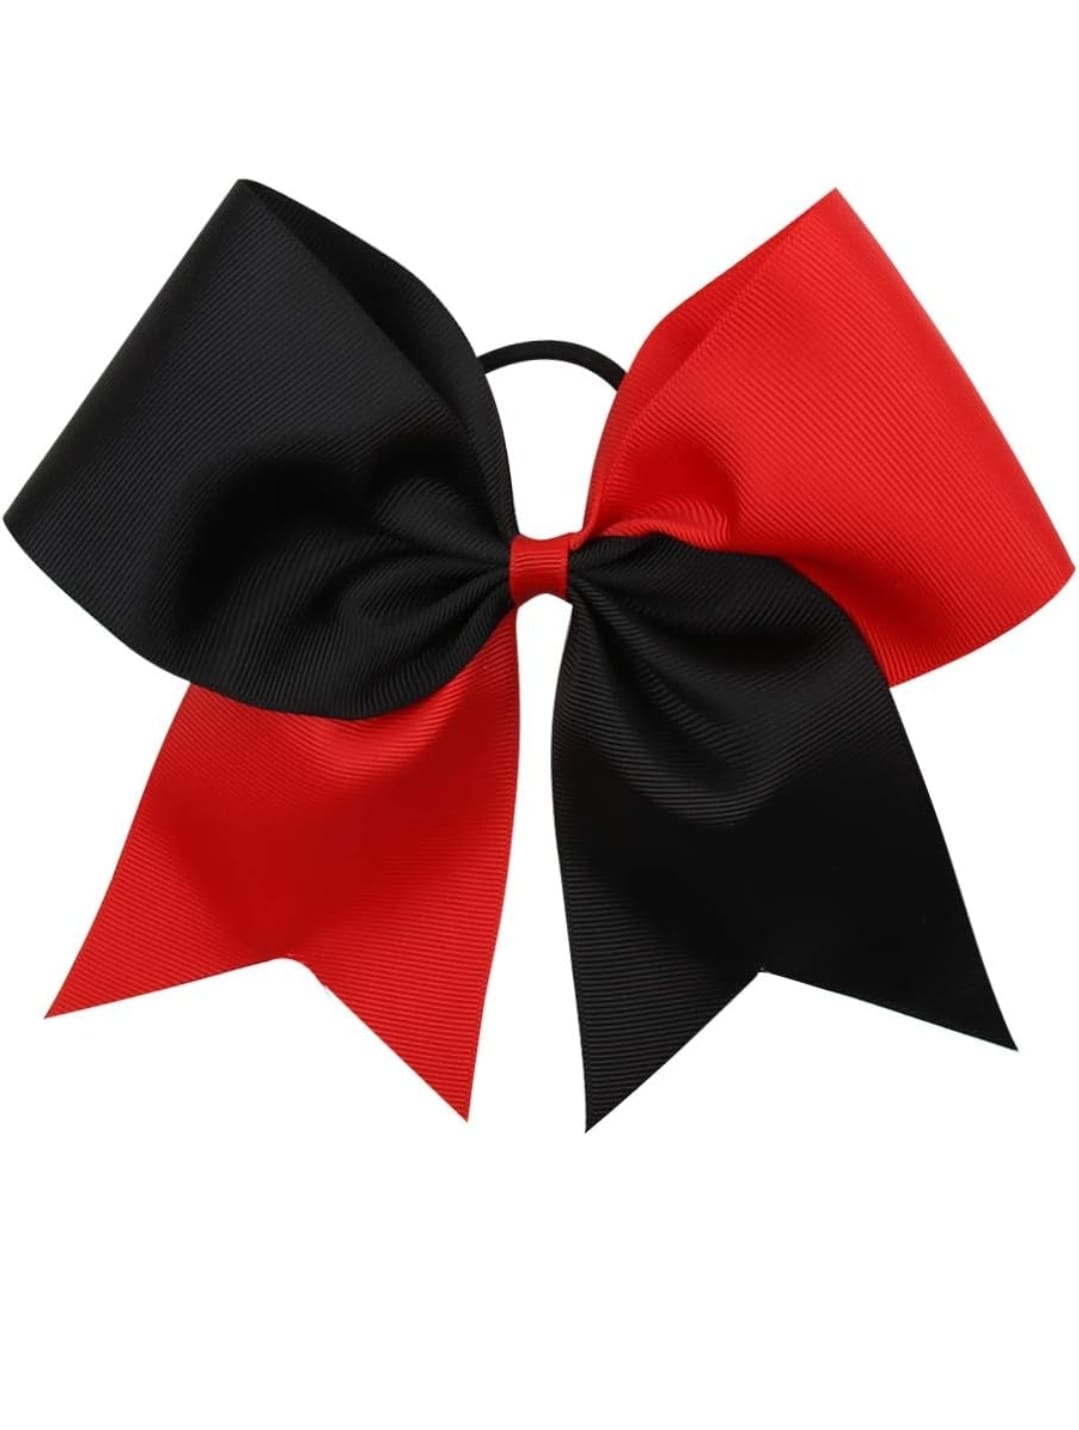 Black and red Cheer Bow